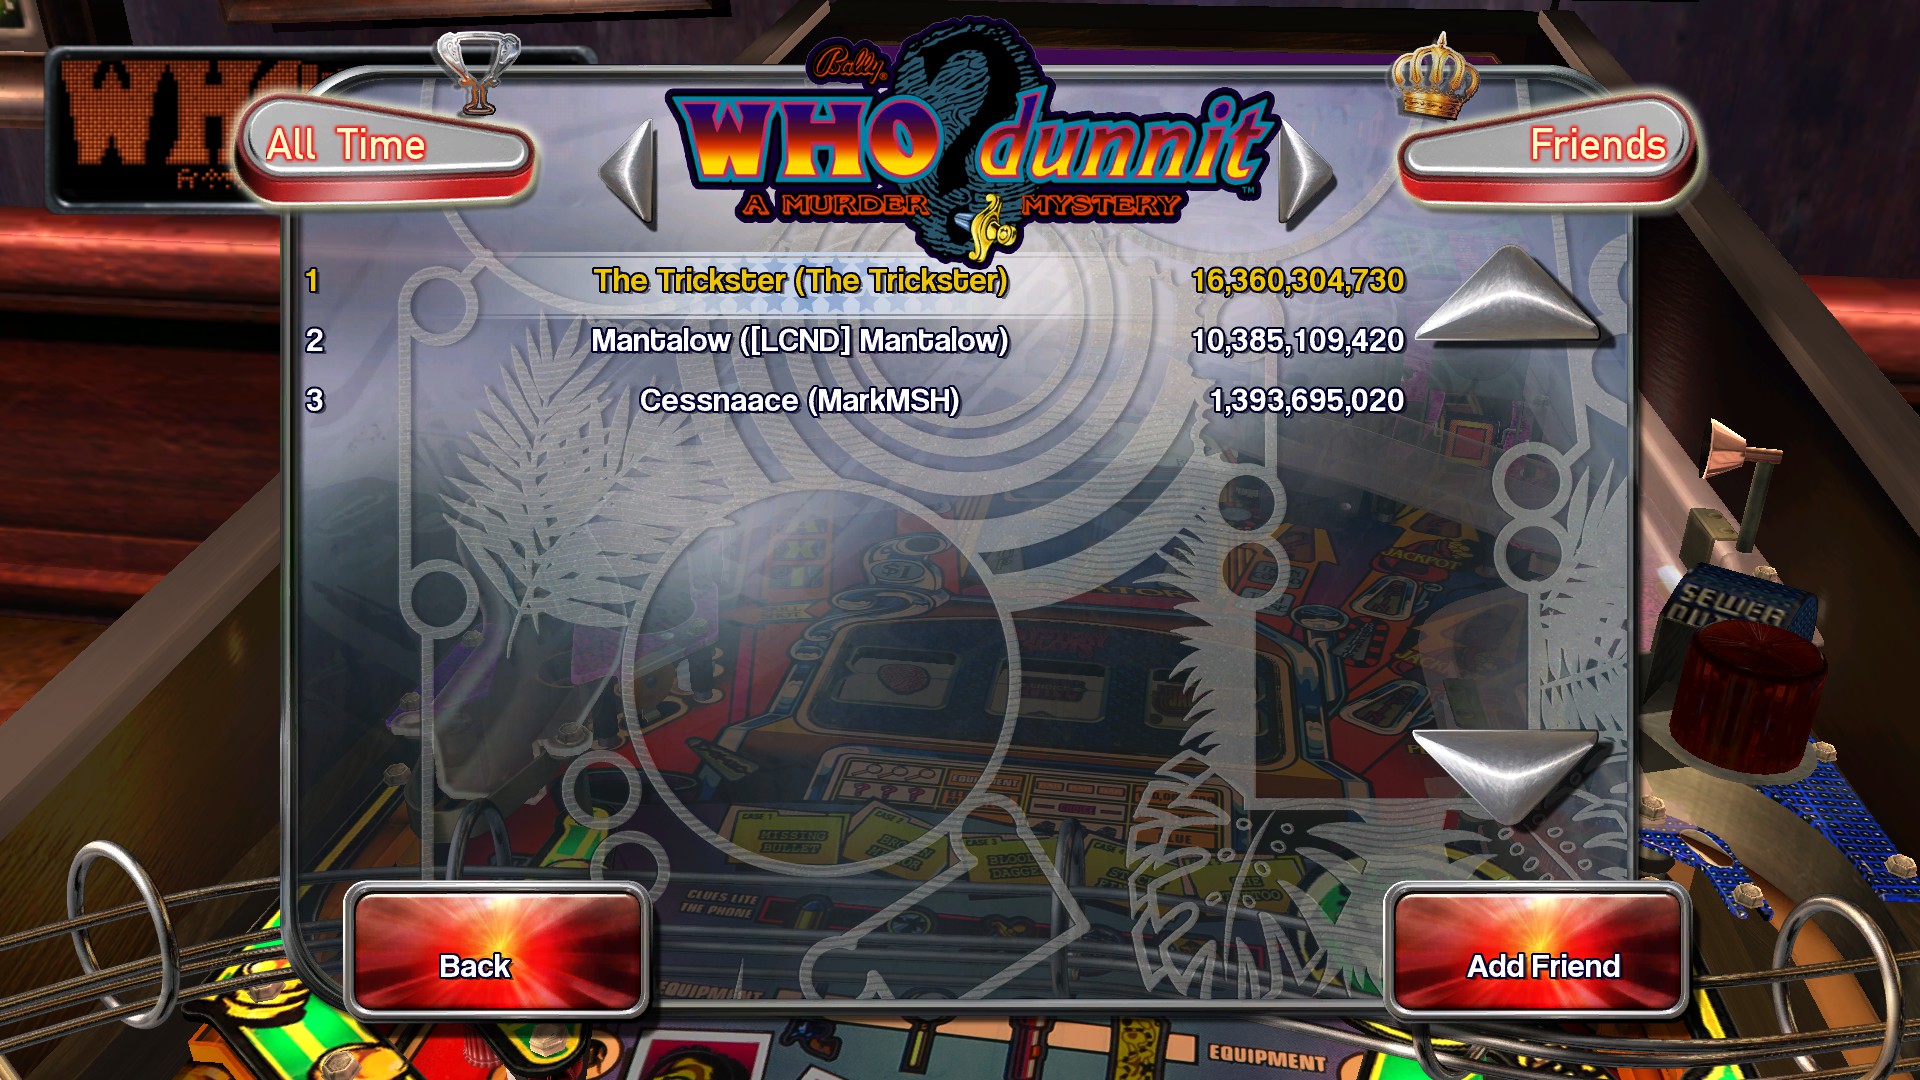 TheTrickster: Pinball Arcade: WHO Dunnit (PC) 16,360,304,730 points on 2015-11-23 01:11:06